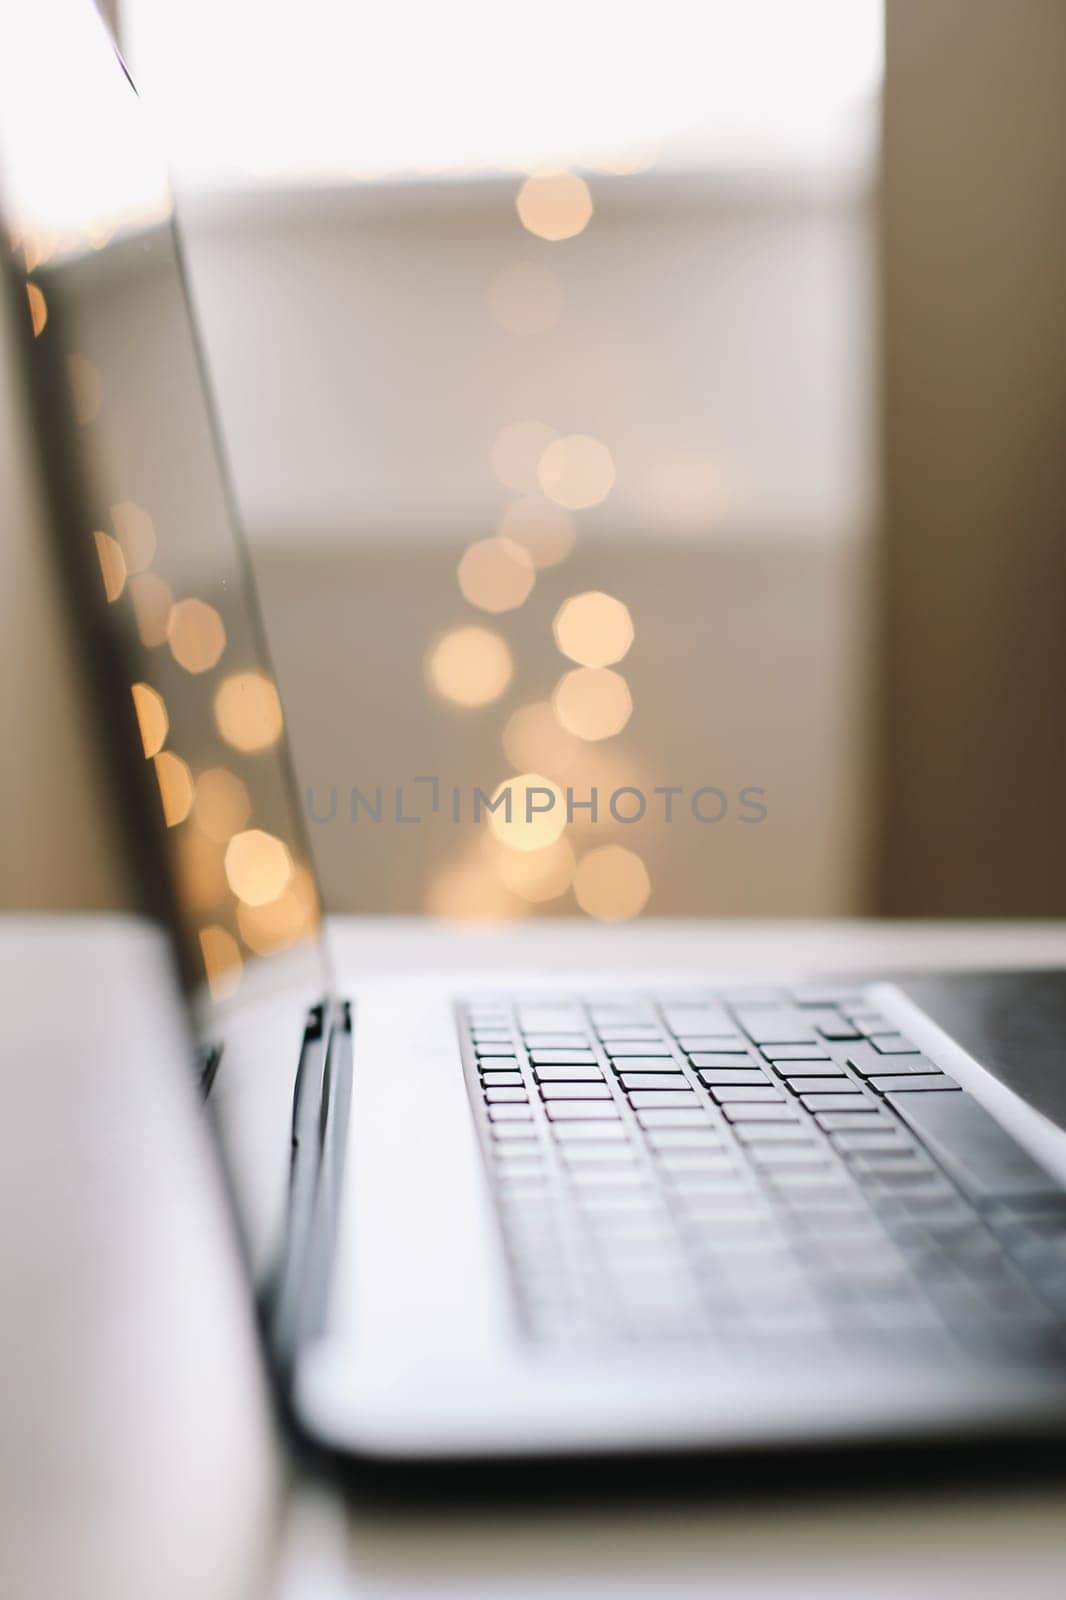 Freelance, working at home office, keyboard close up. Close up of laptop keyboard with blank screen